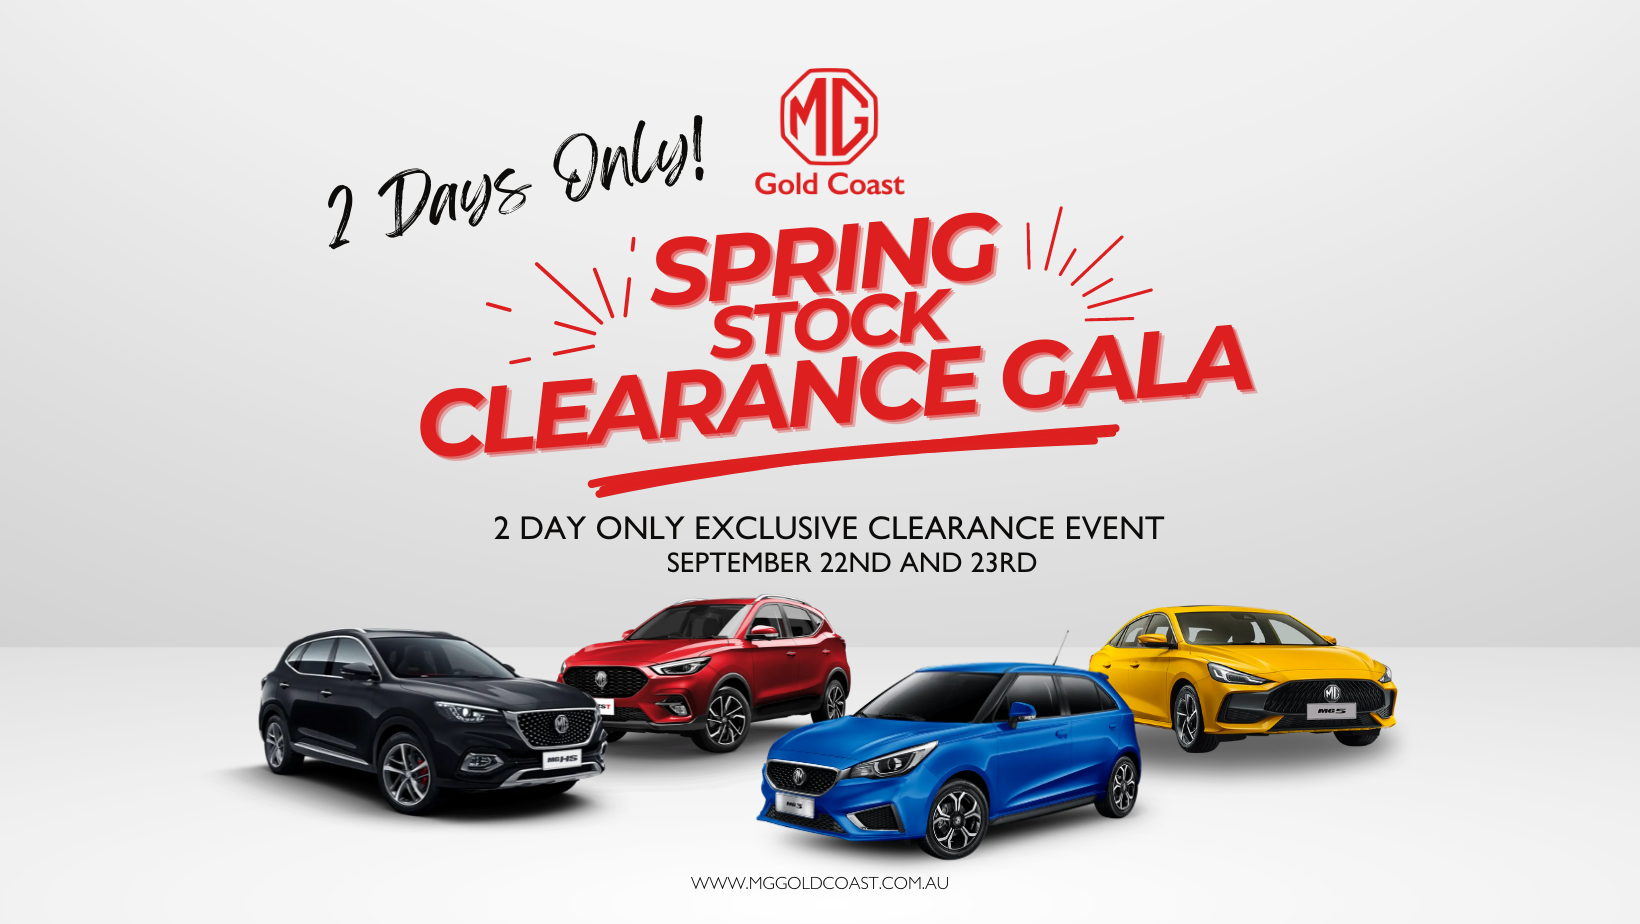 It's our Exclusive Spring Stock Clearance Gala at Gold Coast MG!